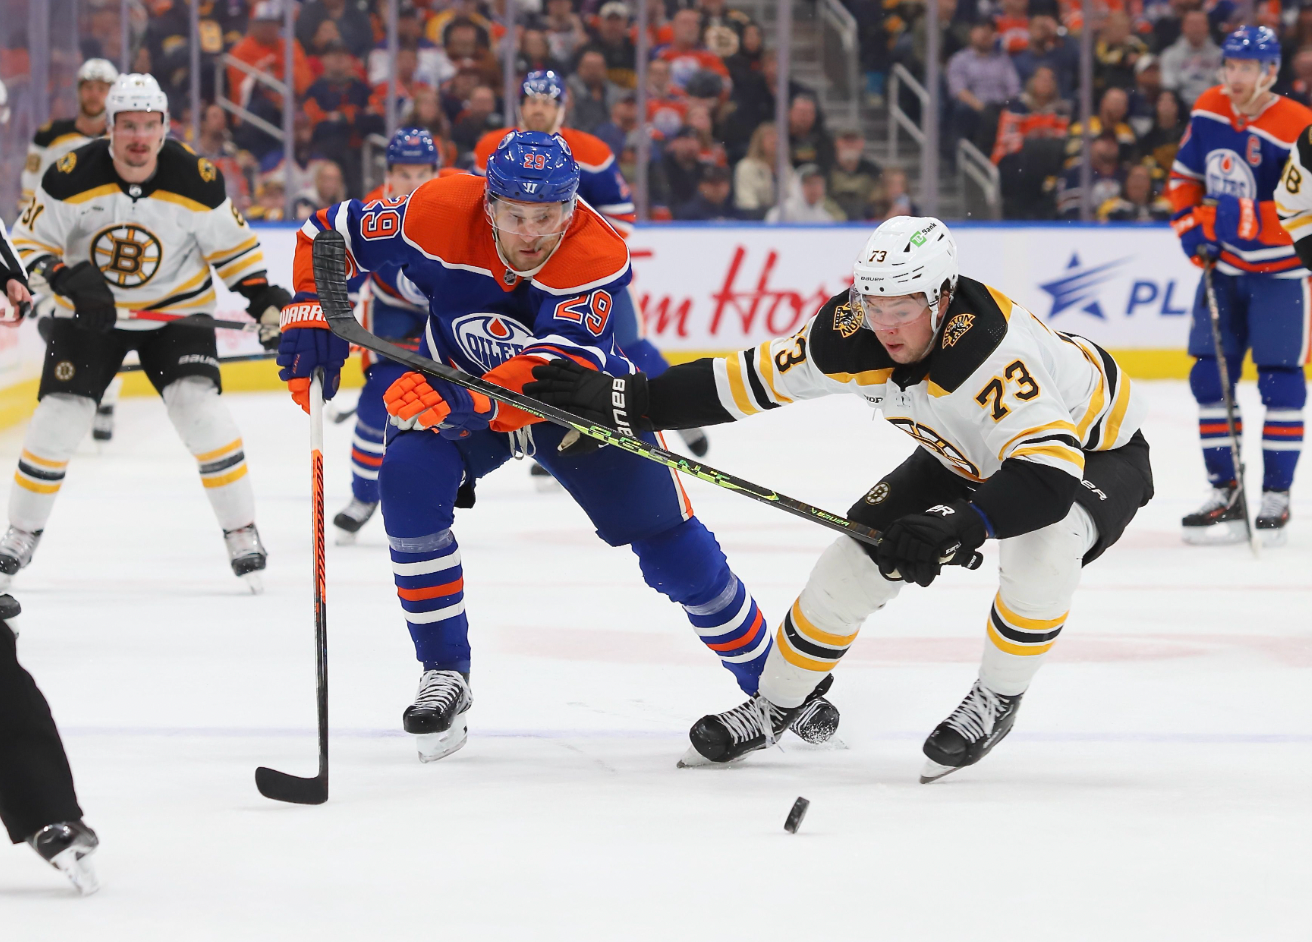 Charlie McAvoy #73 of the Boston Bruins battles for the puck with Leon Draisaitl #29 of the Edmonton Oilers in the second period on February 27, 2023 at Rogers Place in Edmonton, Alberta, Canada.